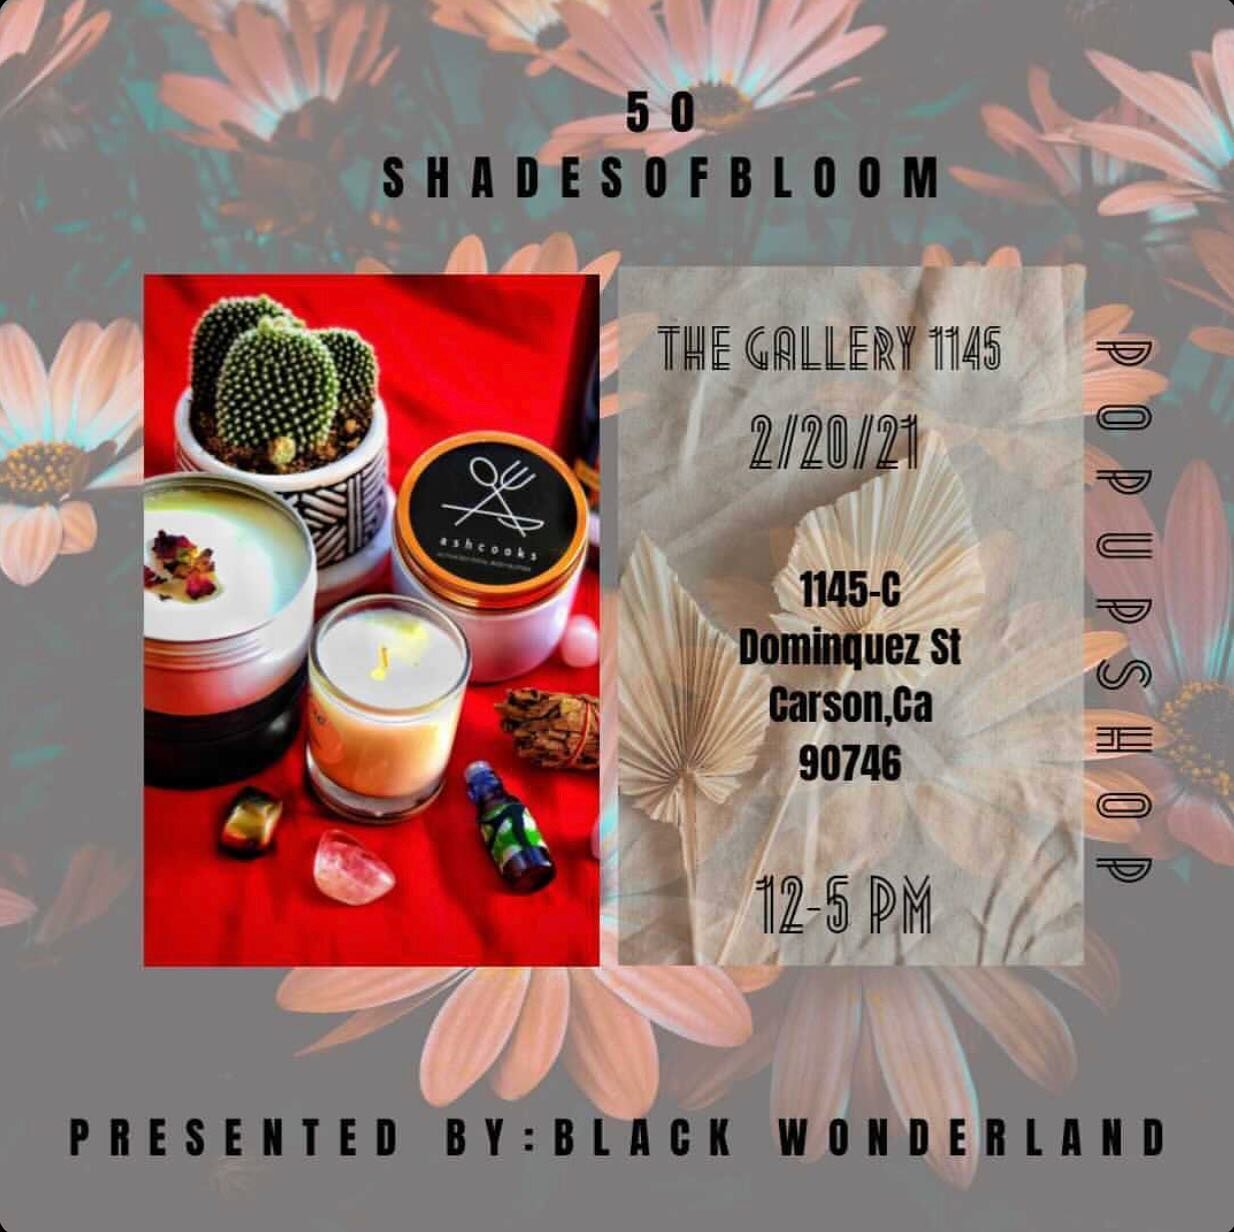 TOMORROW!! 

Pull up and take a lil bit of ashcooks home with ya, in the form of a luxurious body butter, Chakra balancing fragrant oil blend, sage smudge wand, activated crystal or some good old-fashioned hot cocoa (with a modern twist)! I&rsquo;ll 